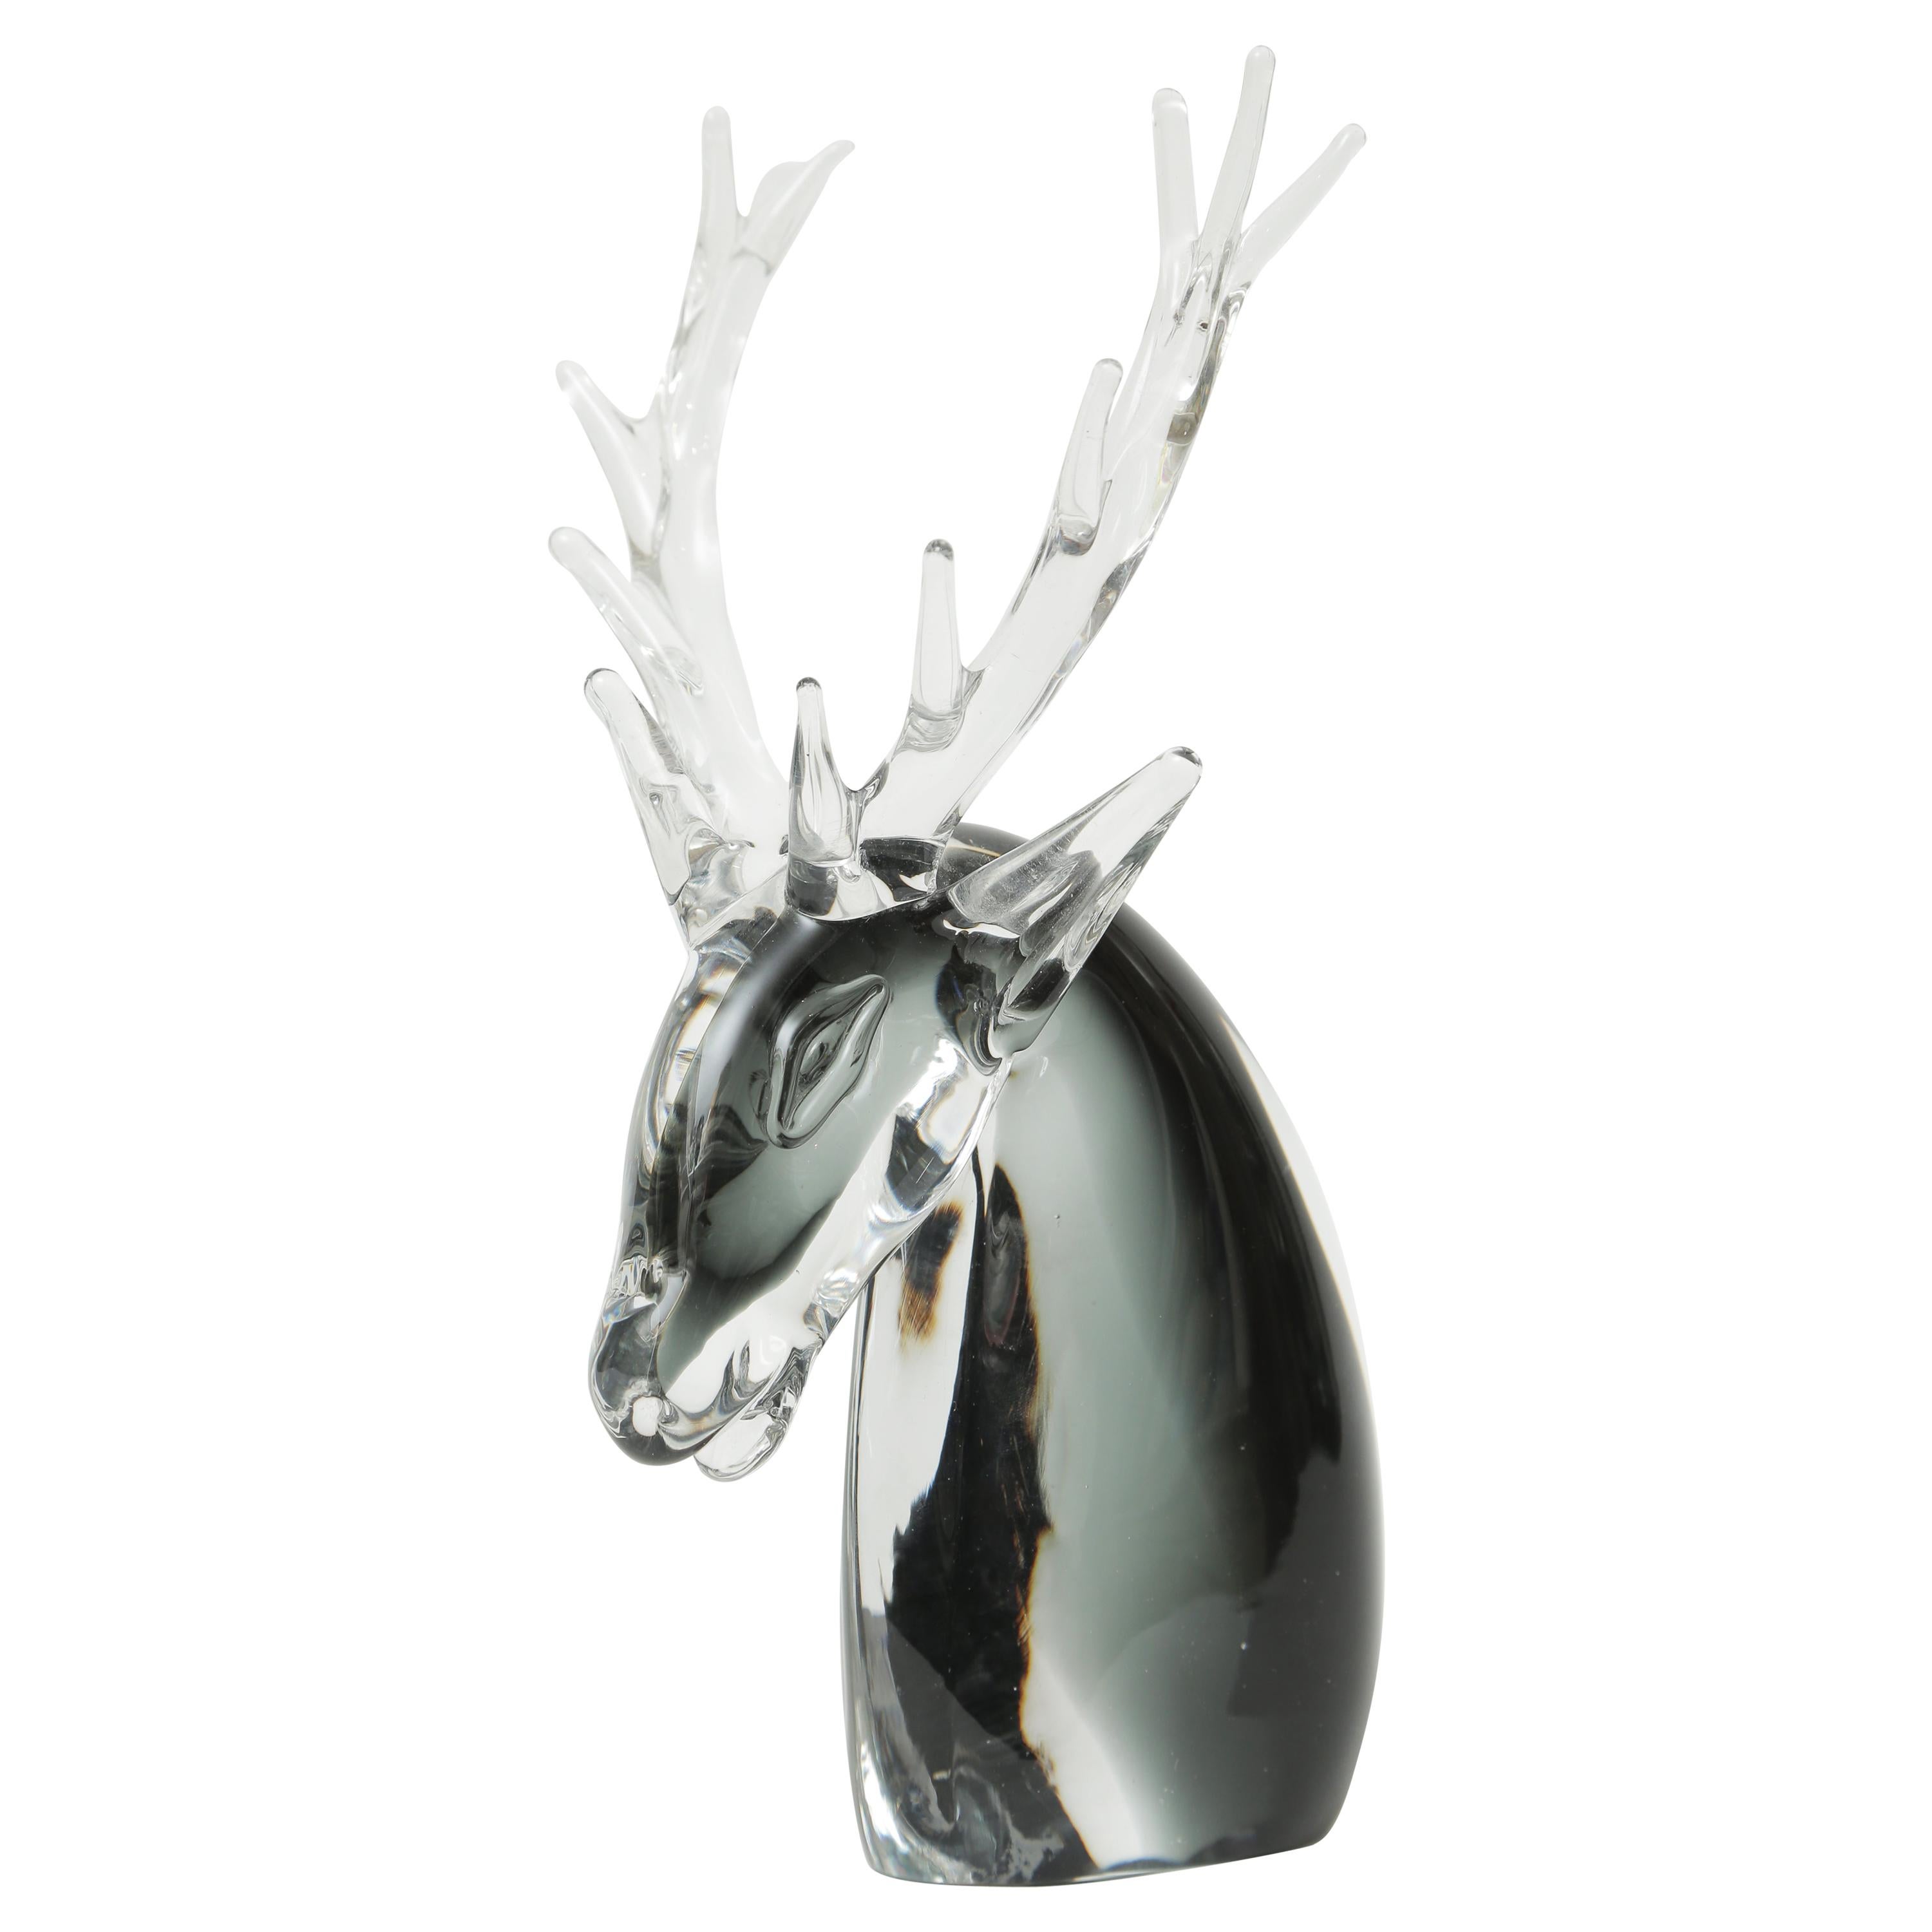 Rare Venetian Glass Sculpture Stag with Antlers, Midcentury Vintage Black Clear